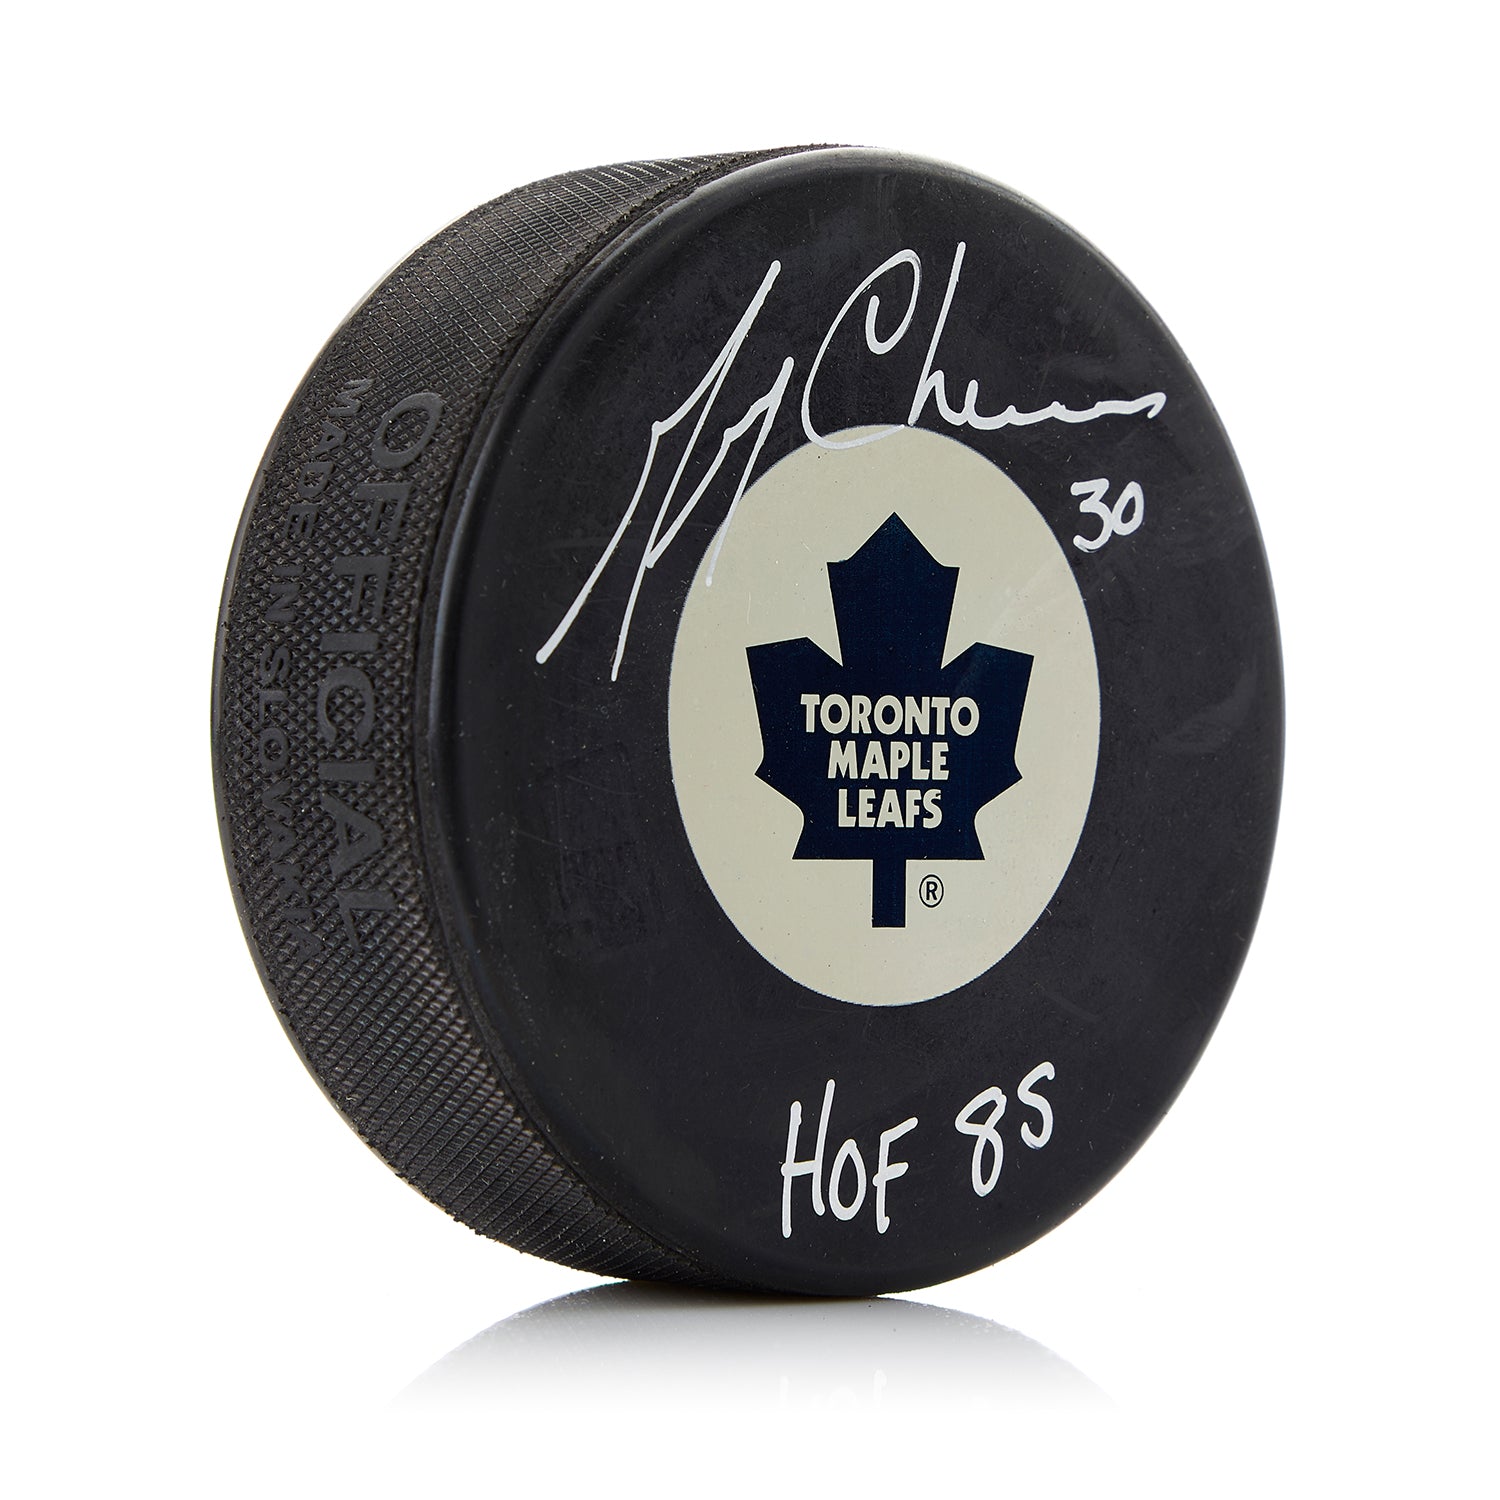 Gerry Cheevers Toronto Maple Leafs Signed Hockey Puck with HOF Note